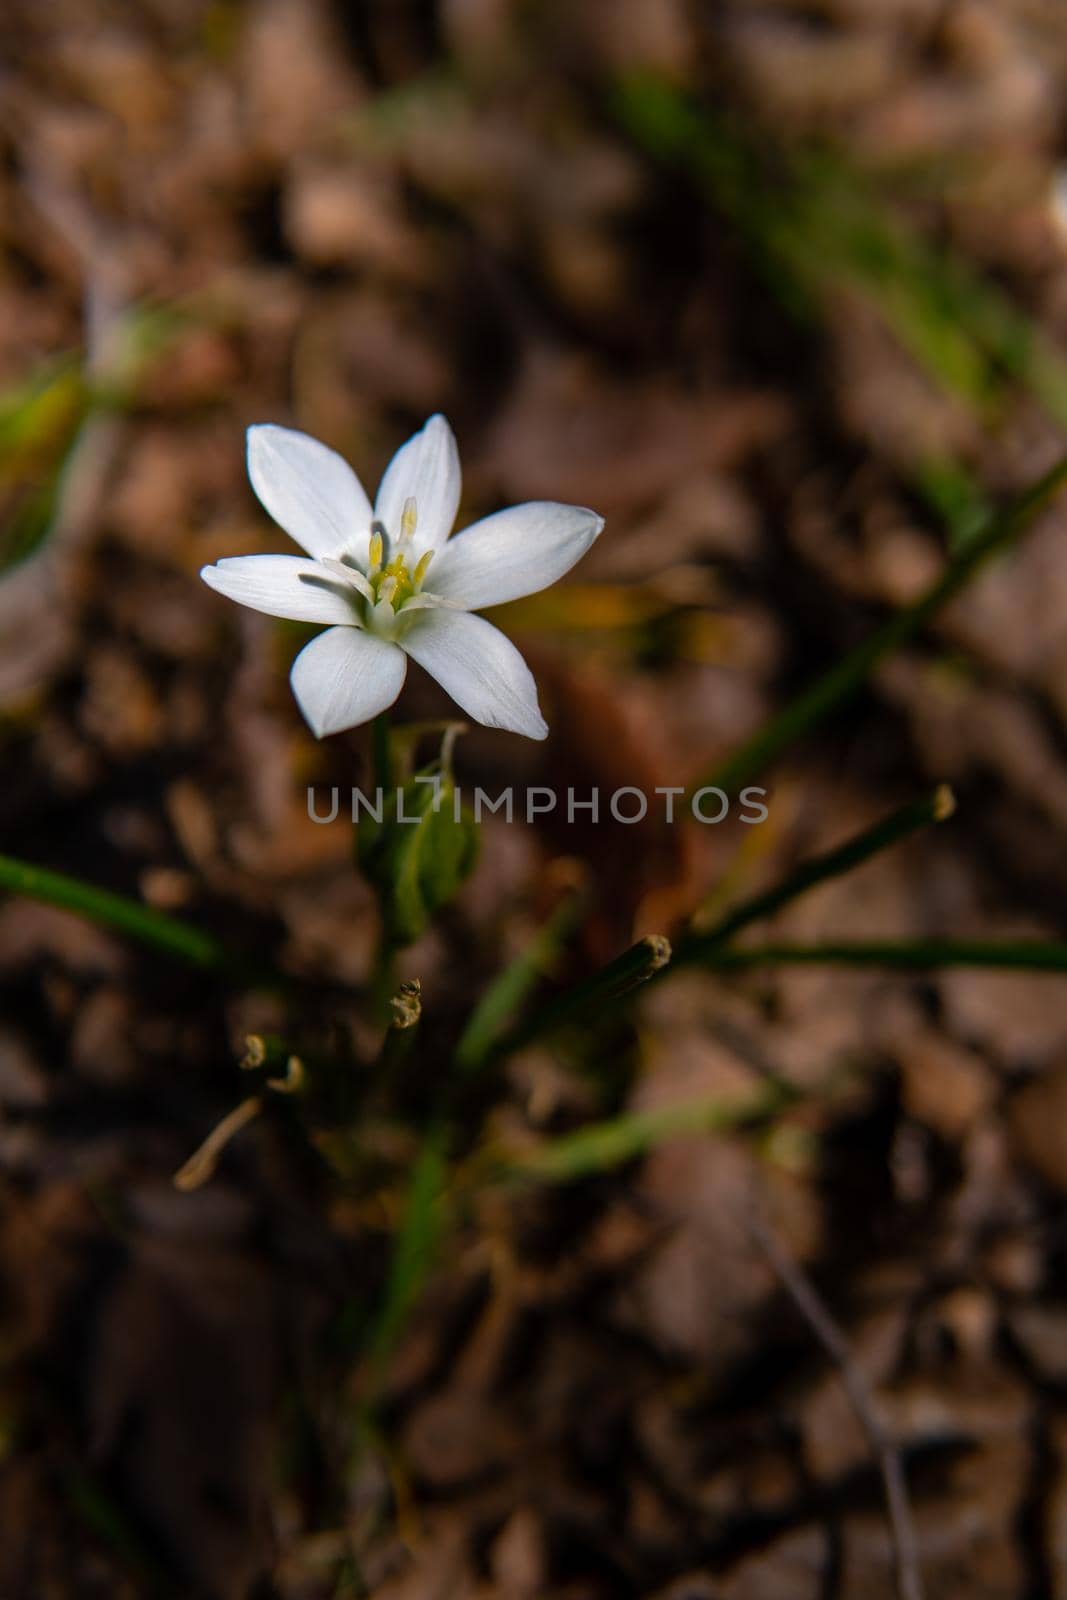 White flower with yellow center and close-up view with brown background by xavier_photo